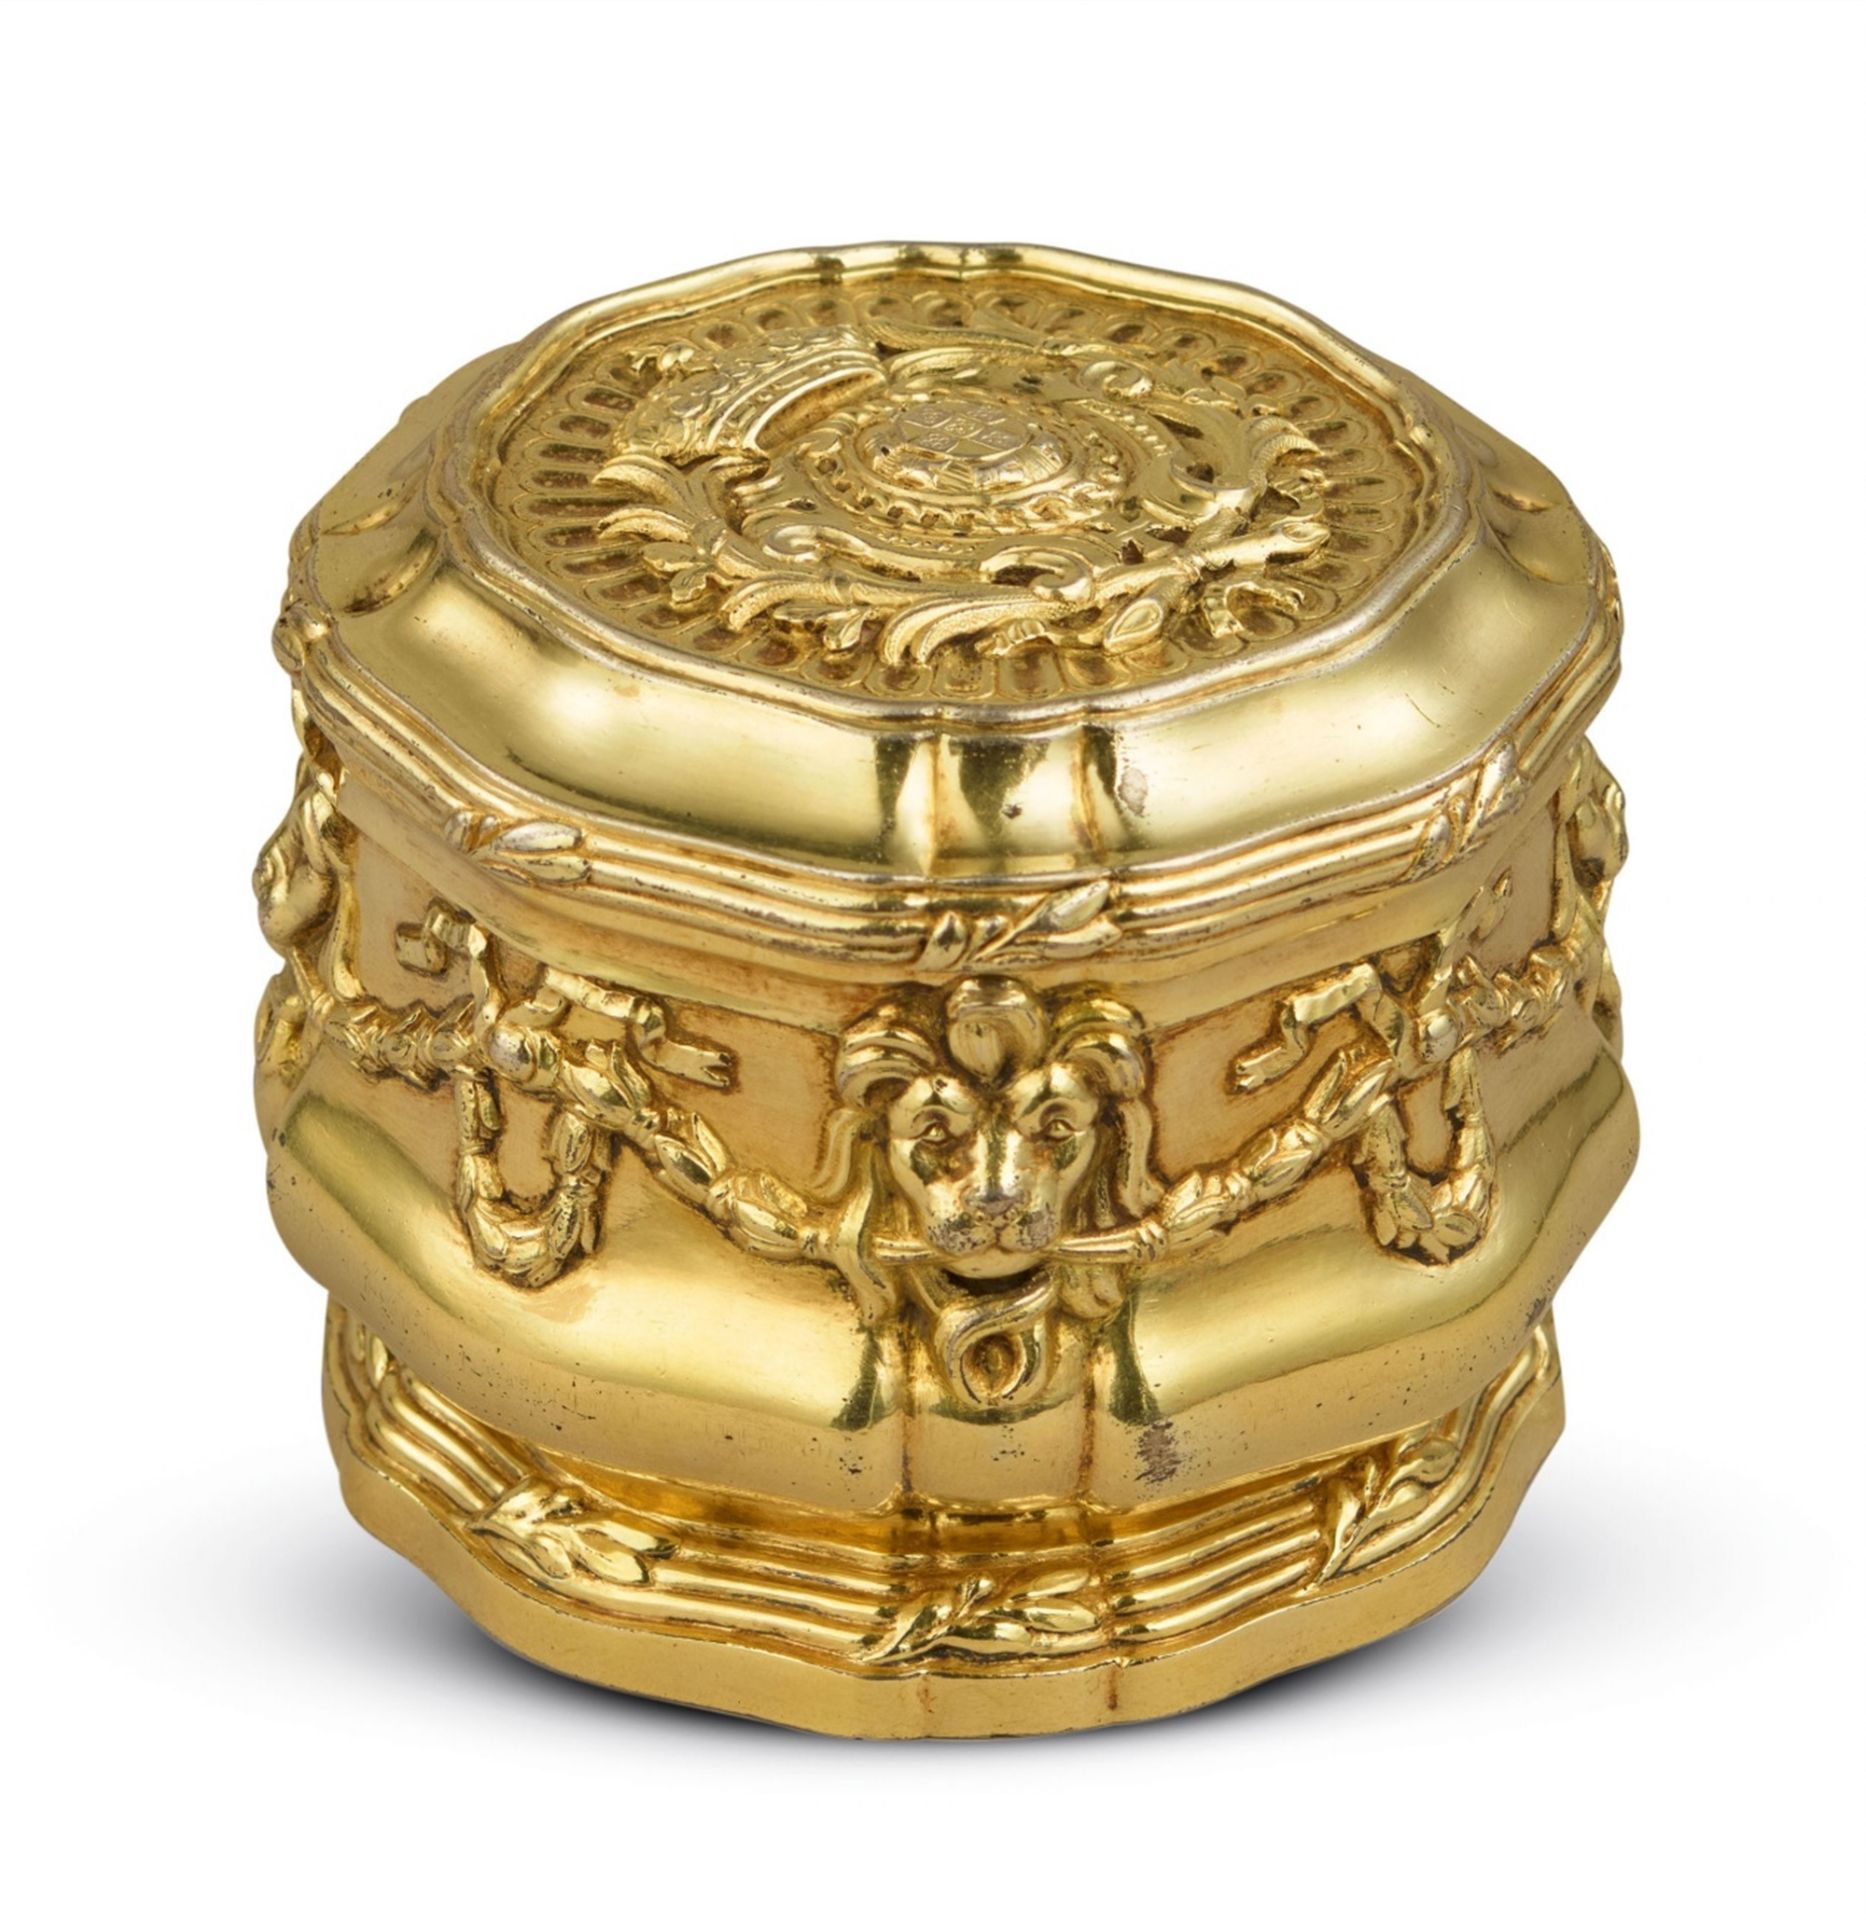 A silver gilt powder box from a toilette set made for the Portuguese royal family